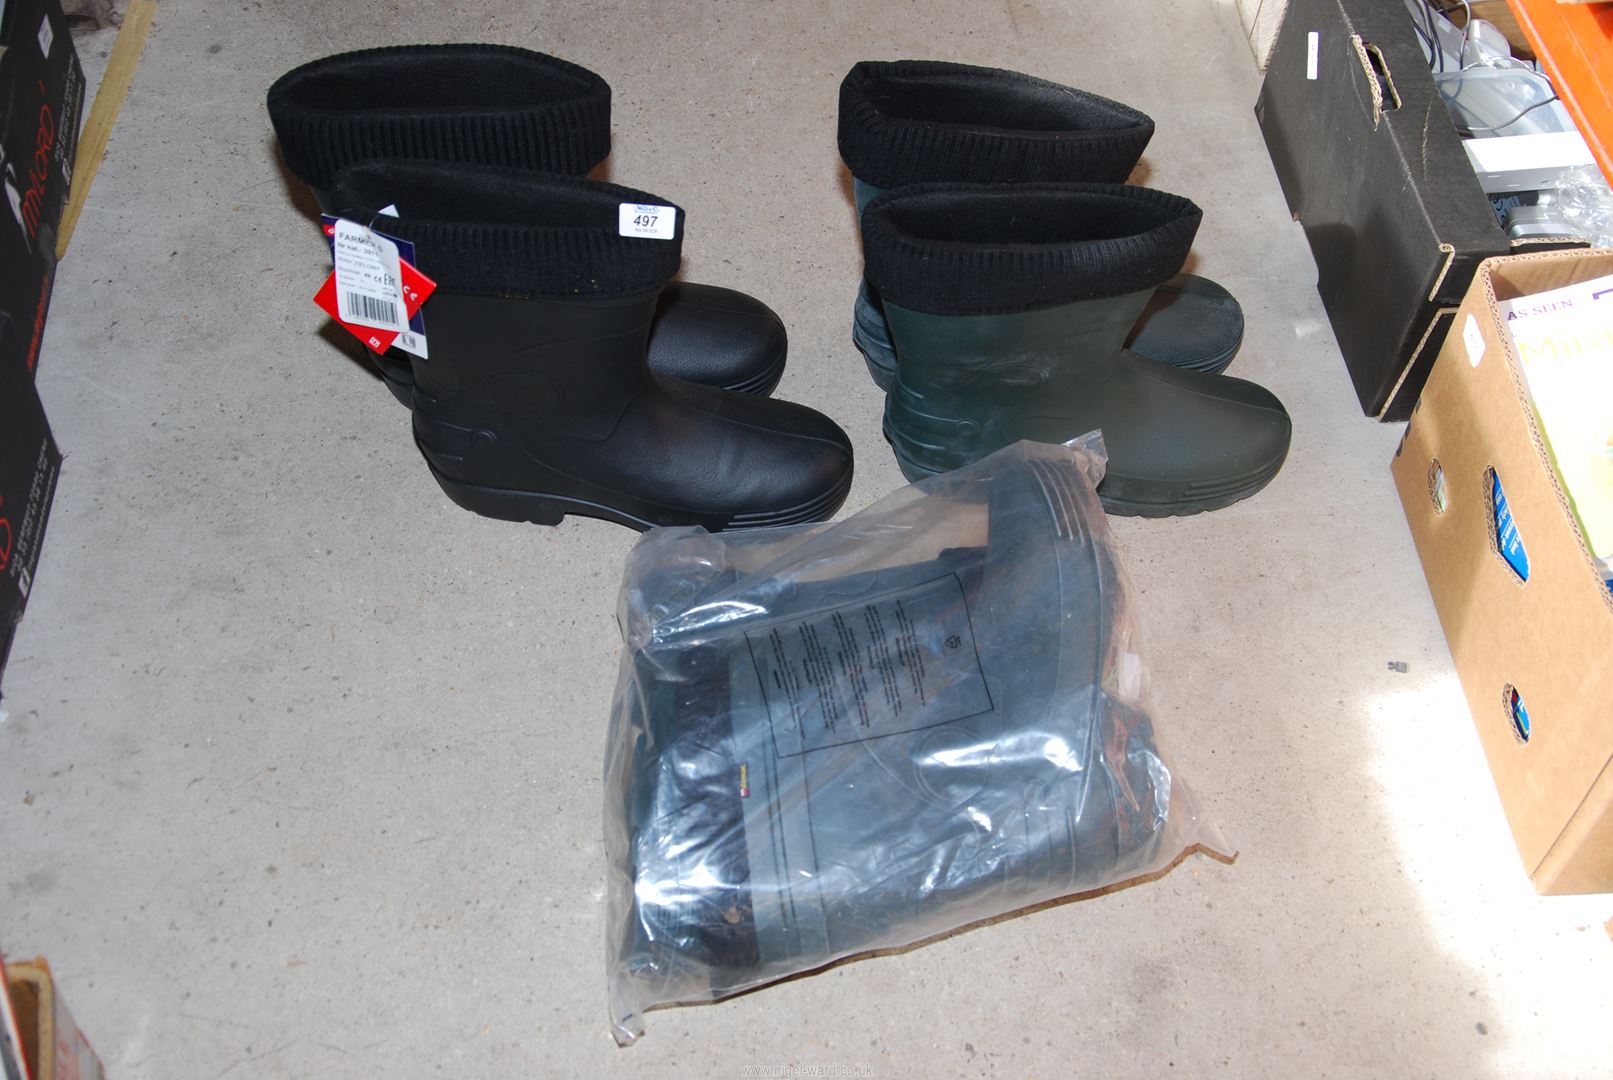 Three pairs of lightweight boots, size 49 - 13 1/2.